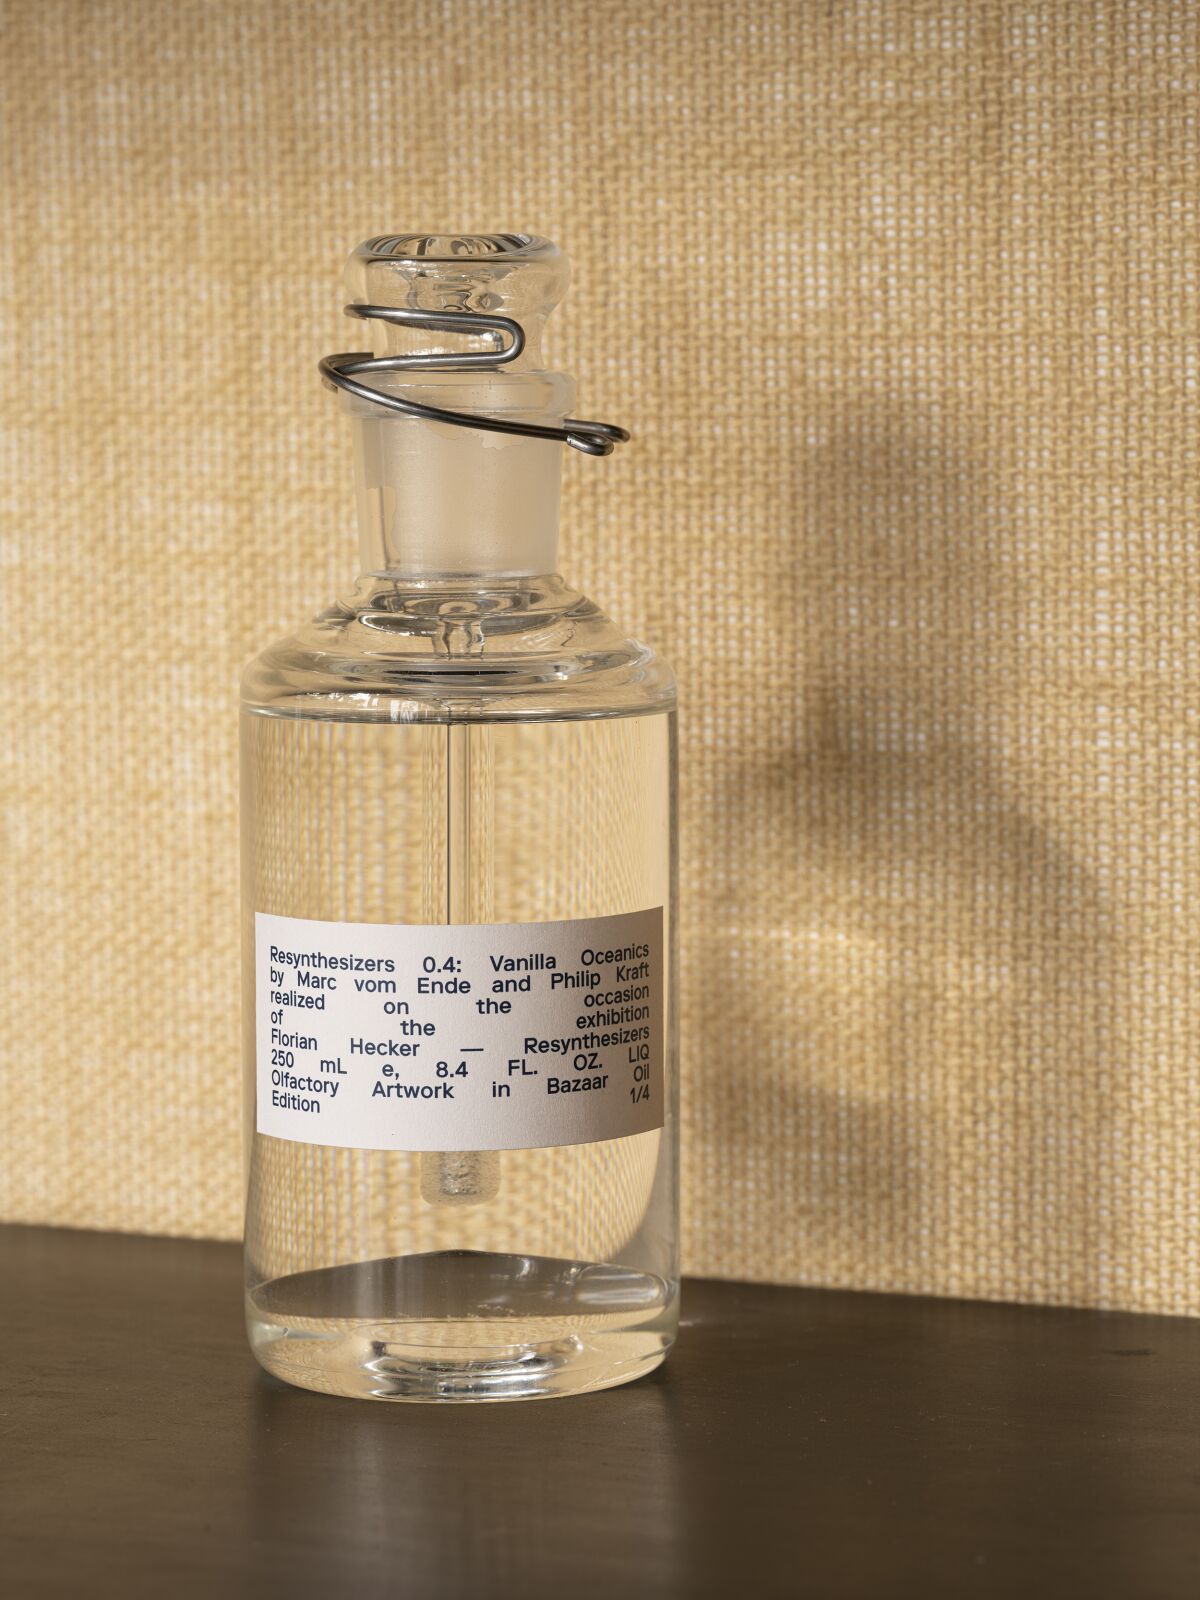 A vial of scent with a label that reads "Resynthesizers 0.4: Vanilla Oceanics by Marc von Ende and Philip Kraft."